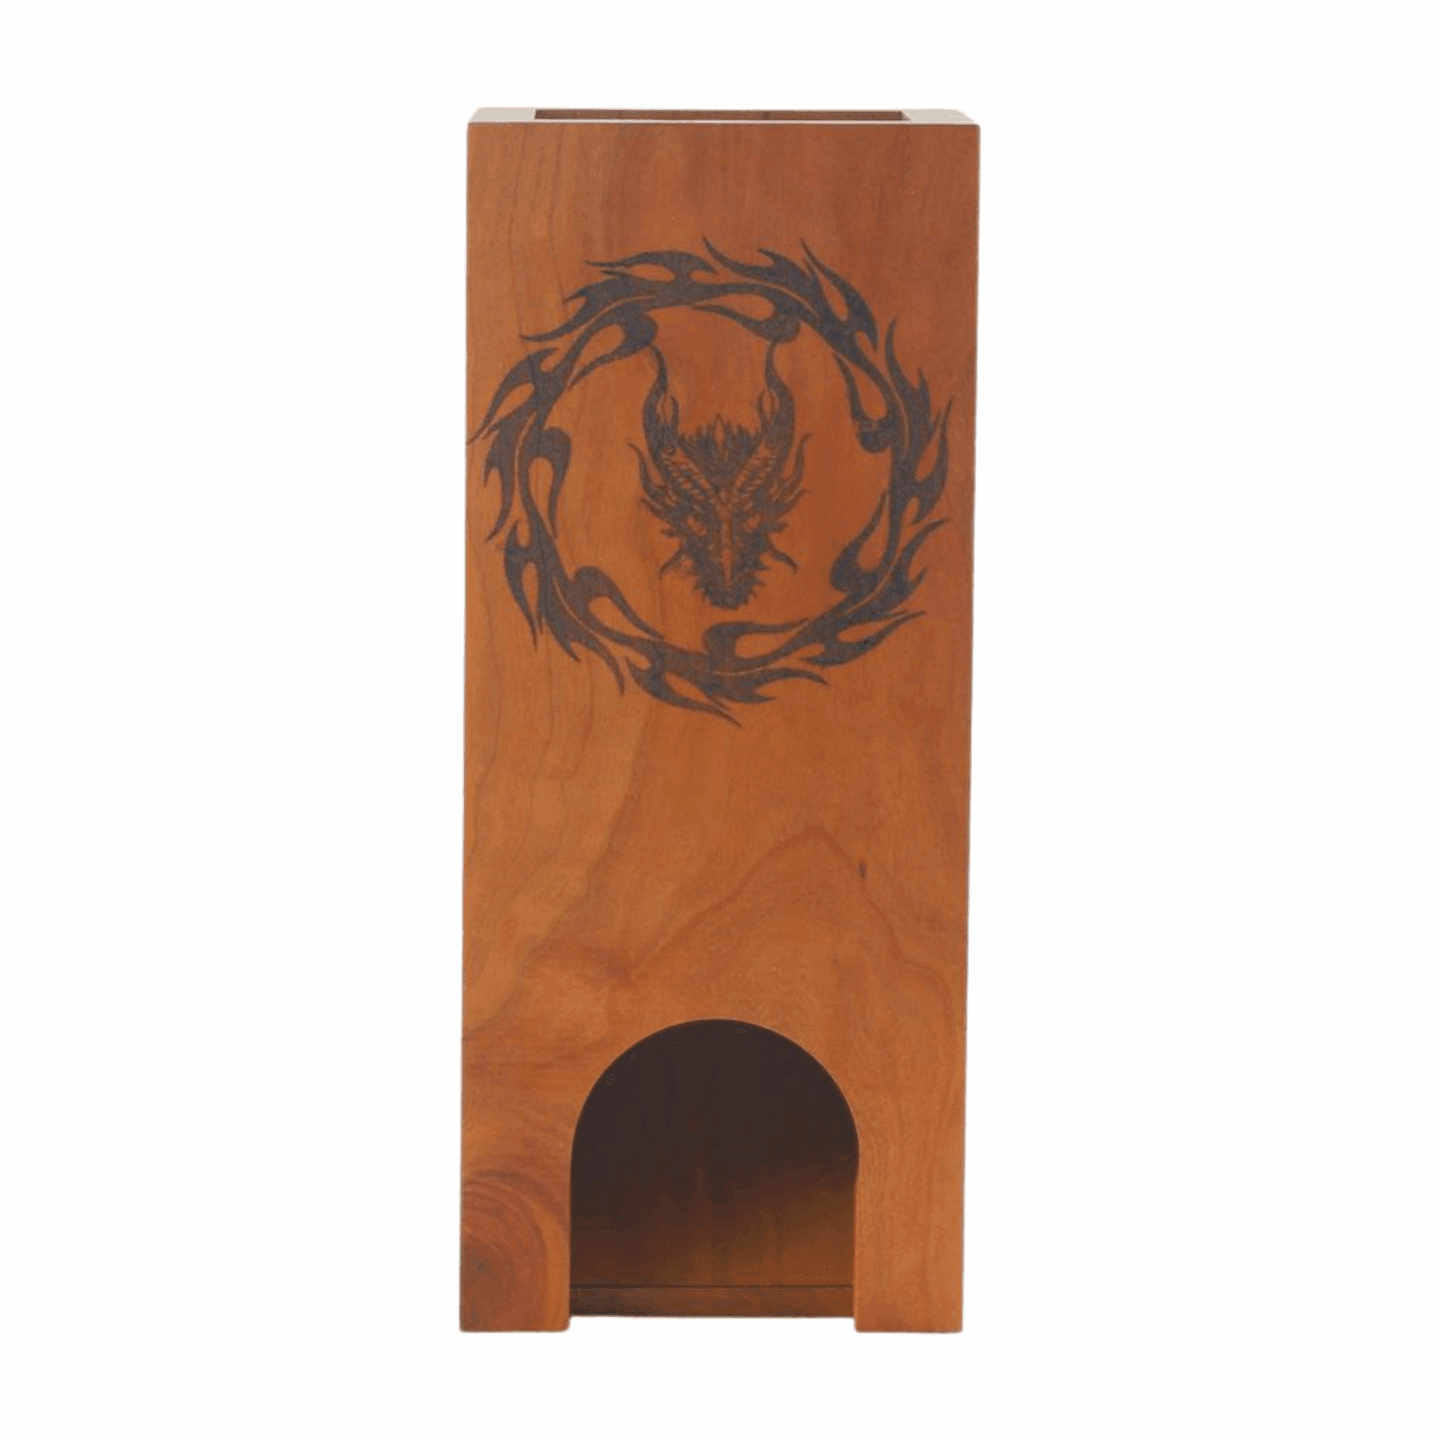 Cherry and Walnut Dice Tower with Dragon Encircled in Flames - Dragon Armor Games